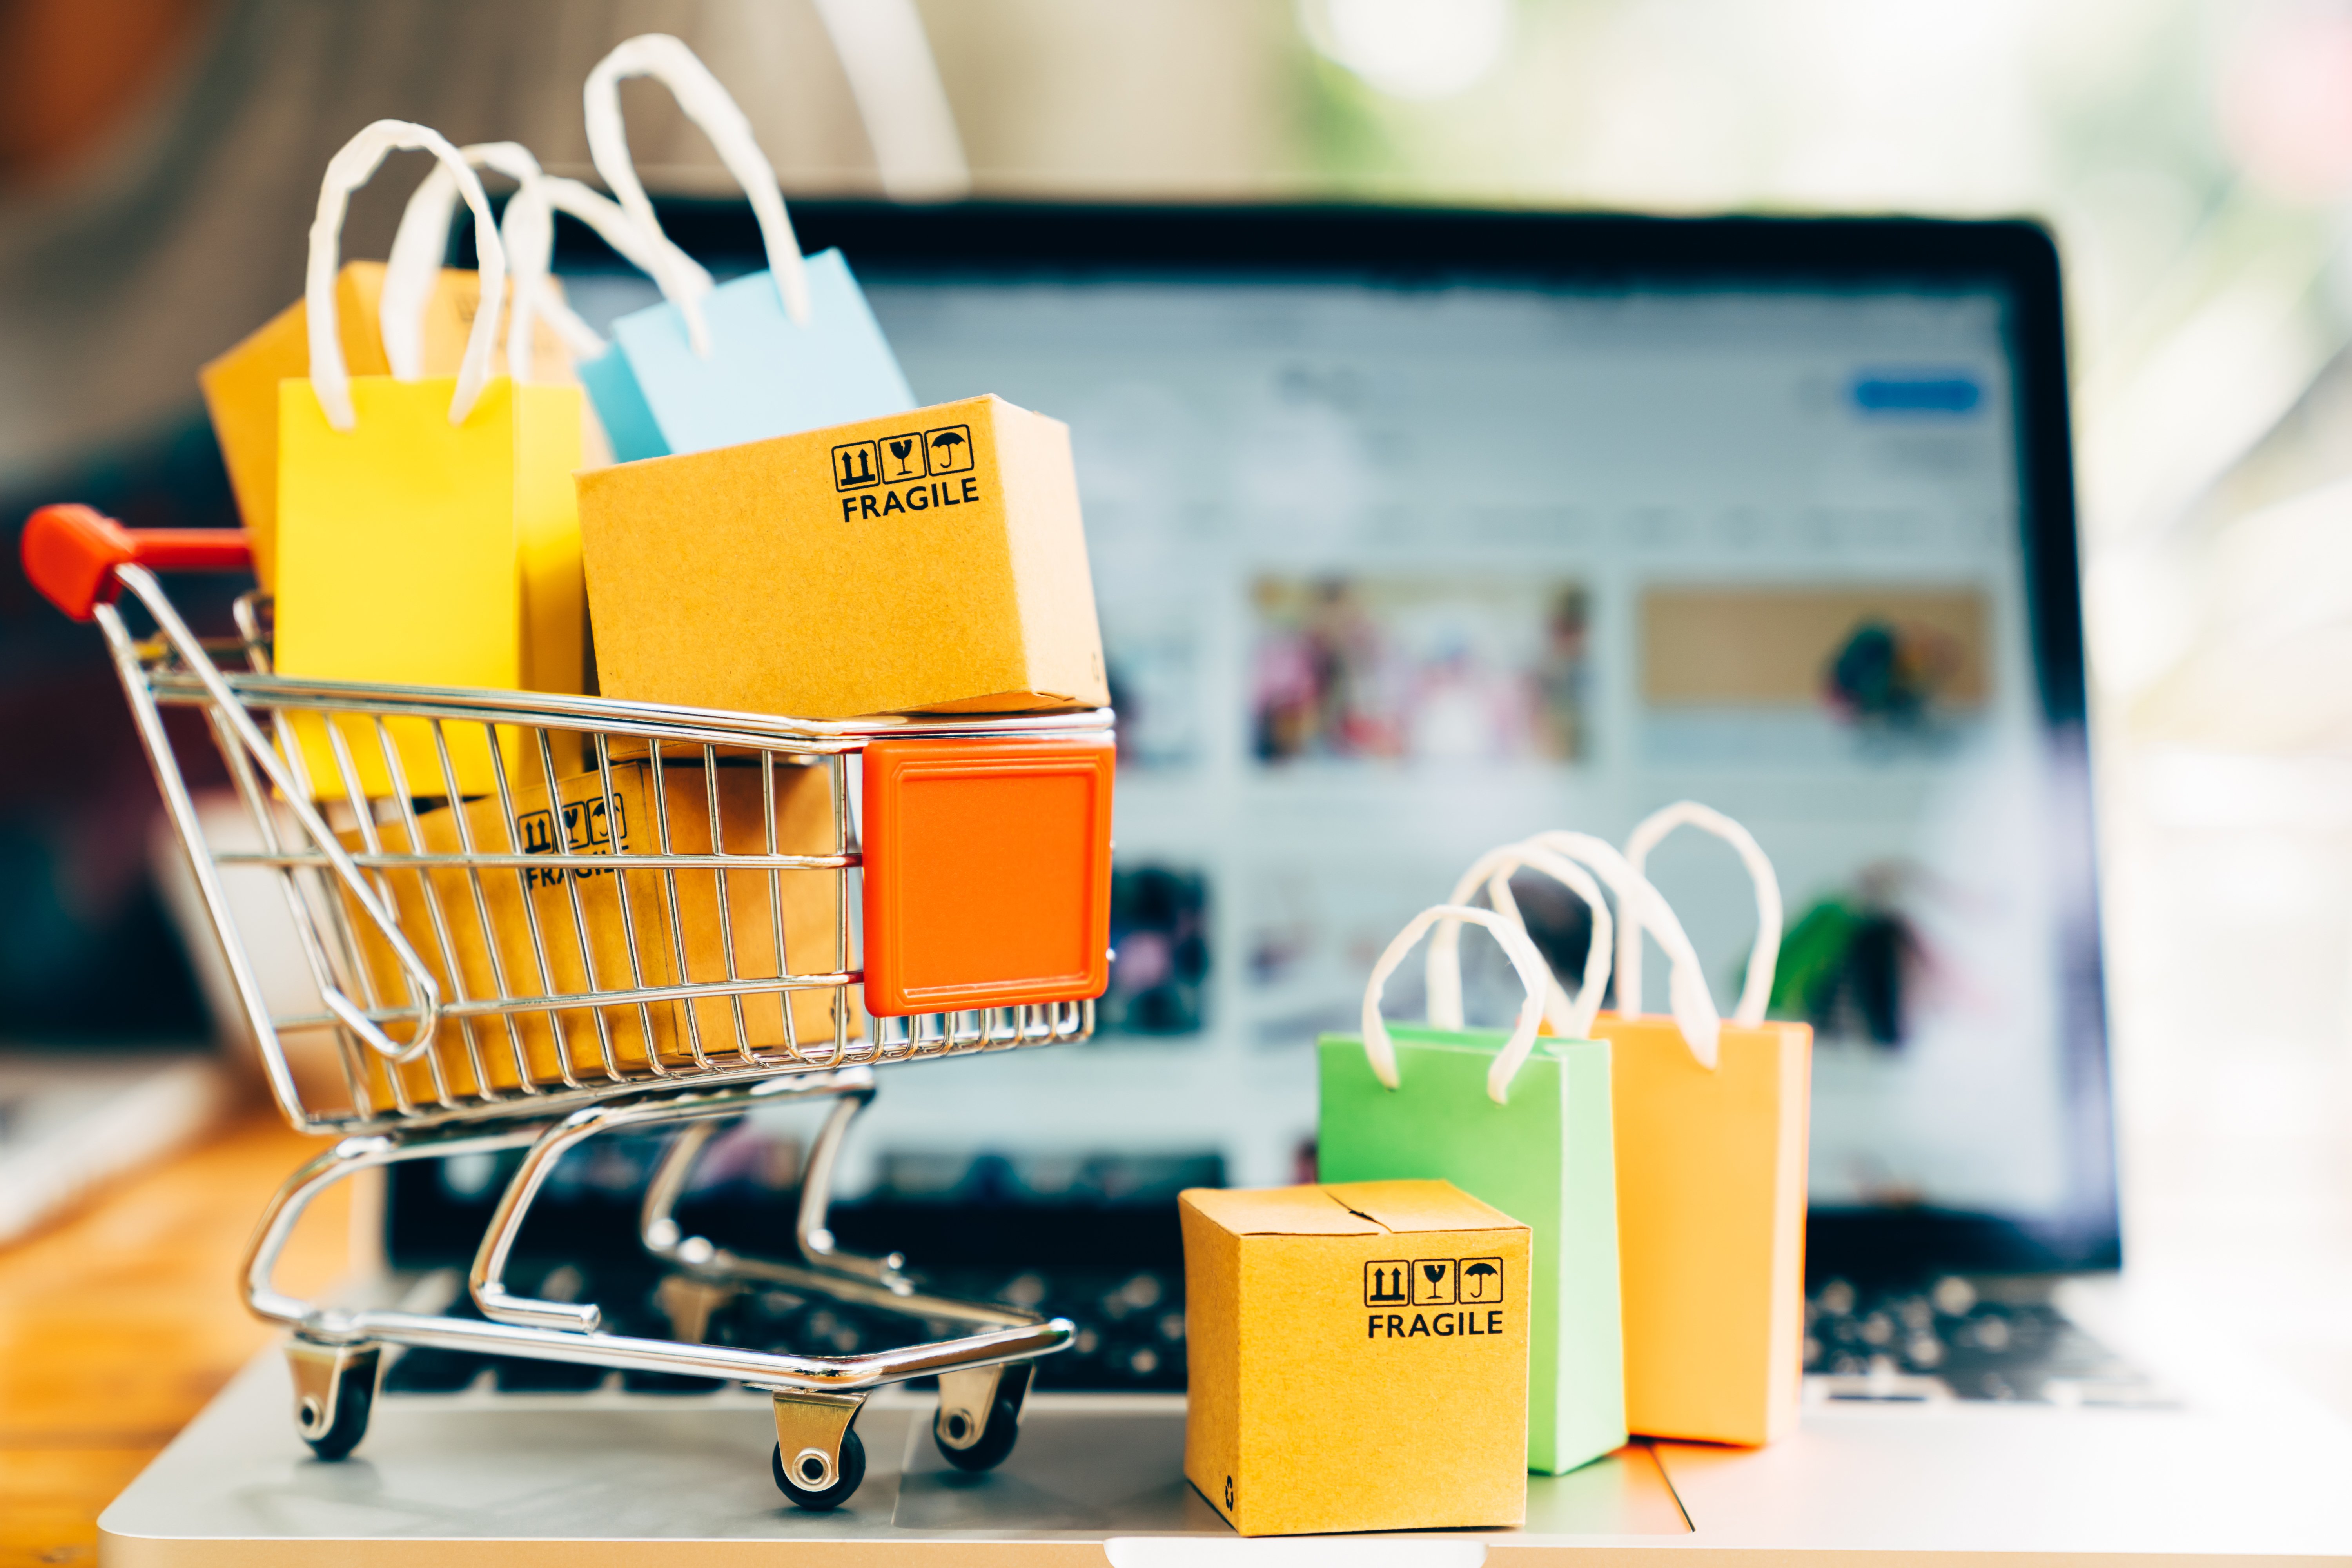 product-package-boxes-and-shopping-bag-in-cart-with-laptop-for-online-shopping-and-delivery-concept